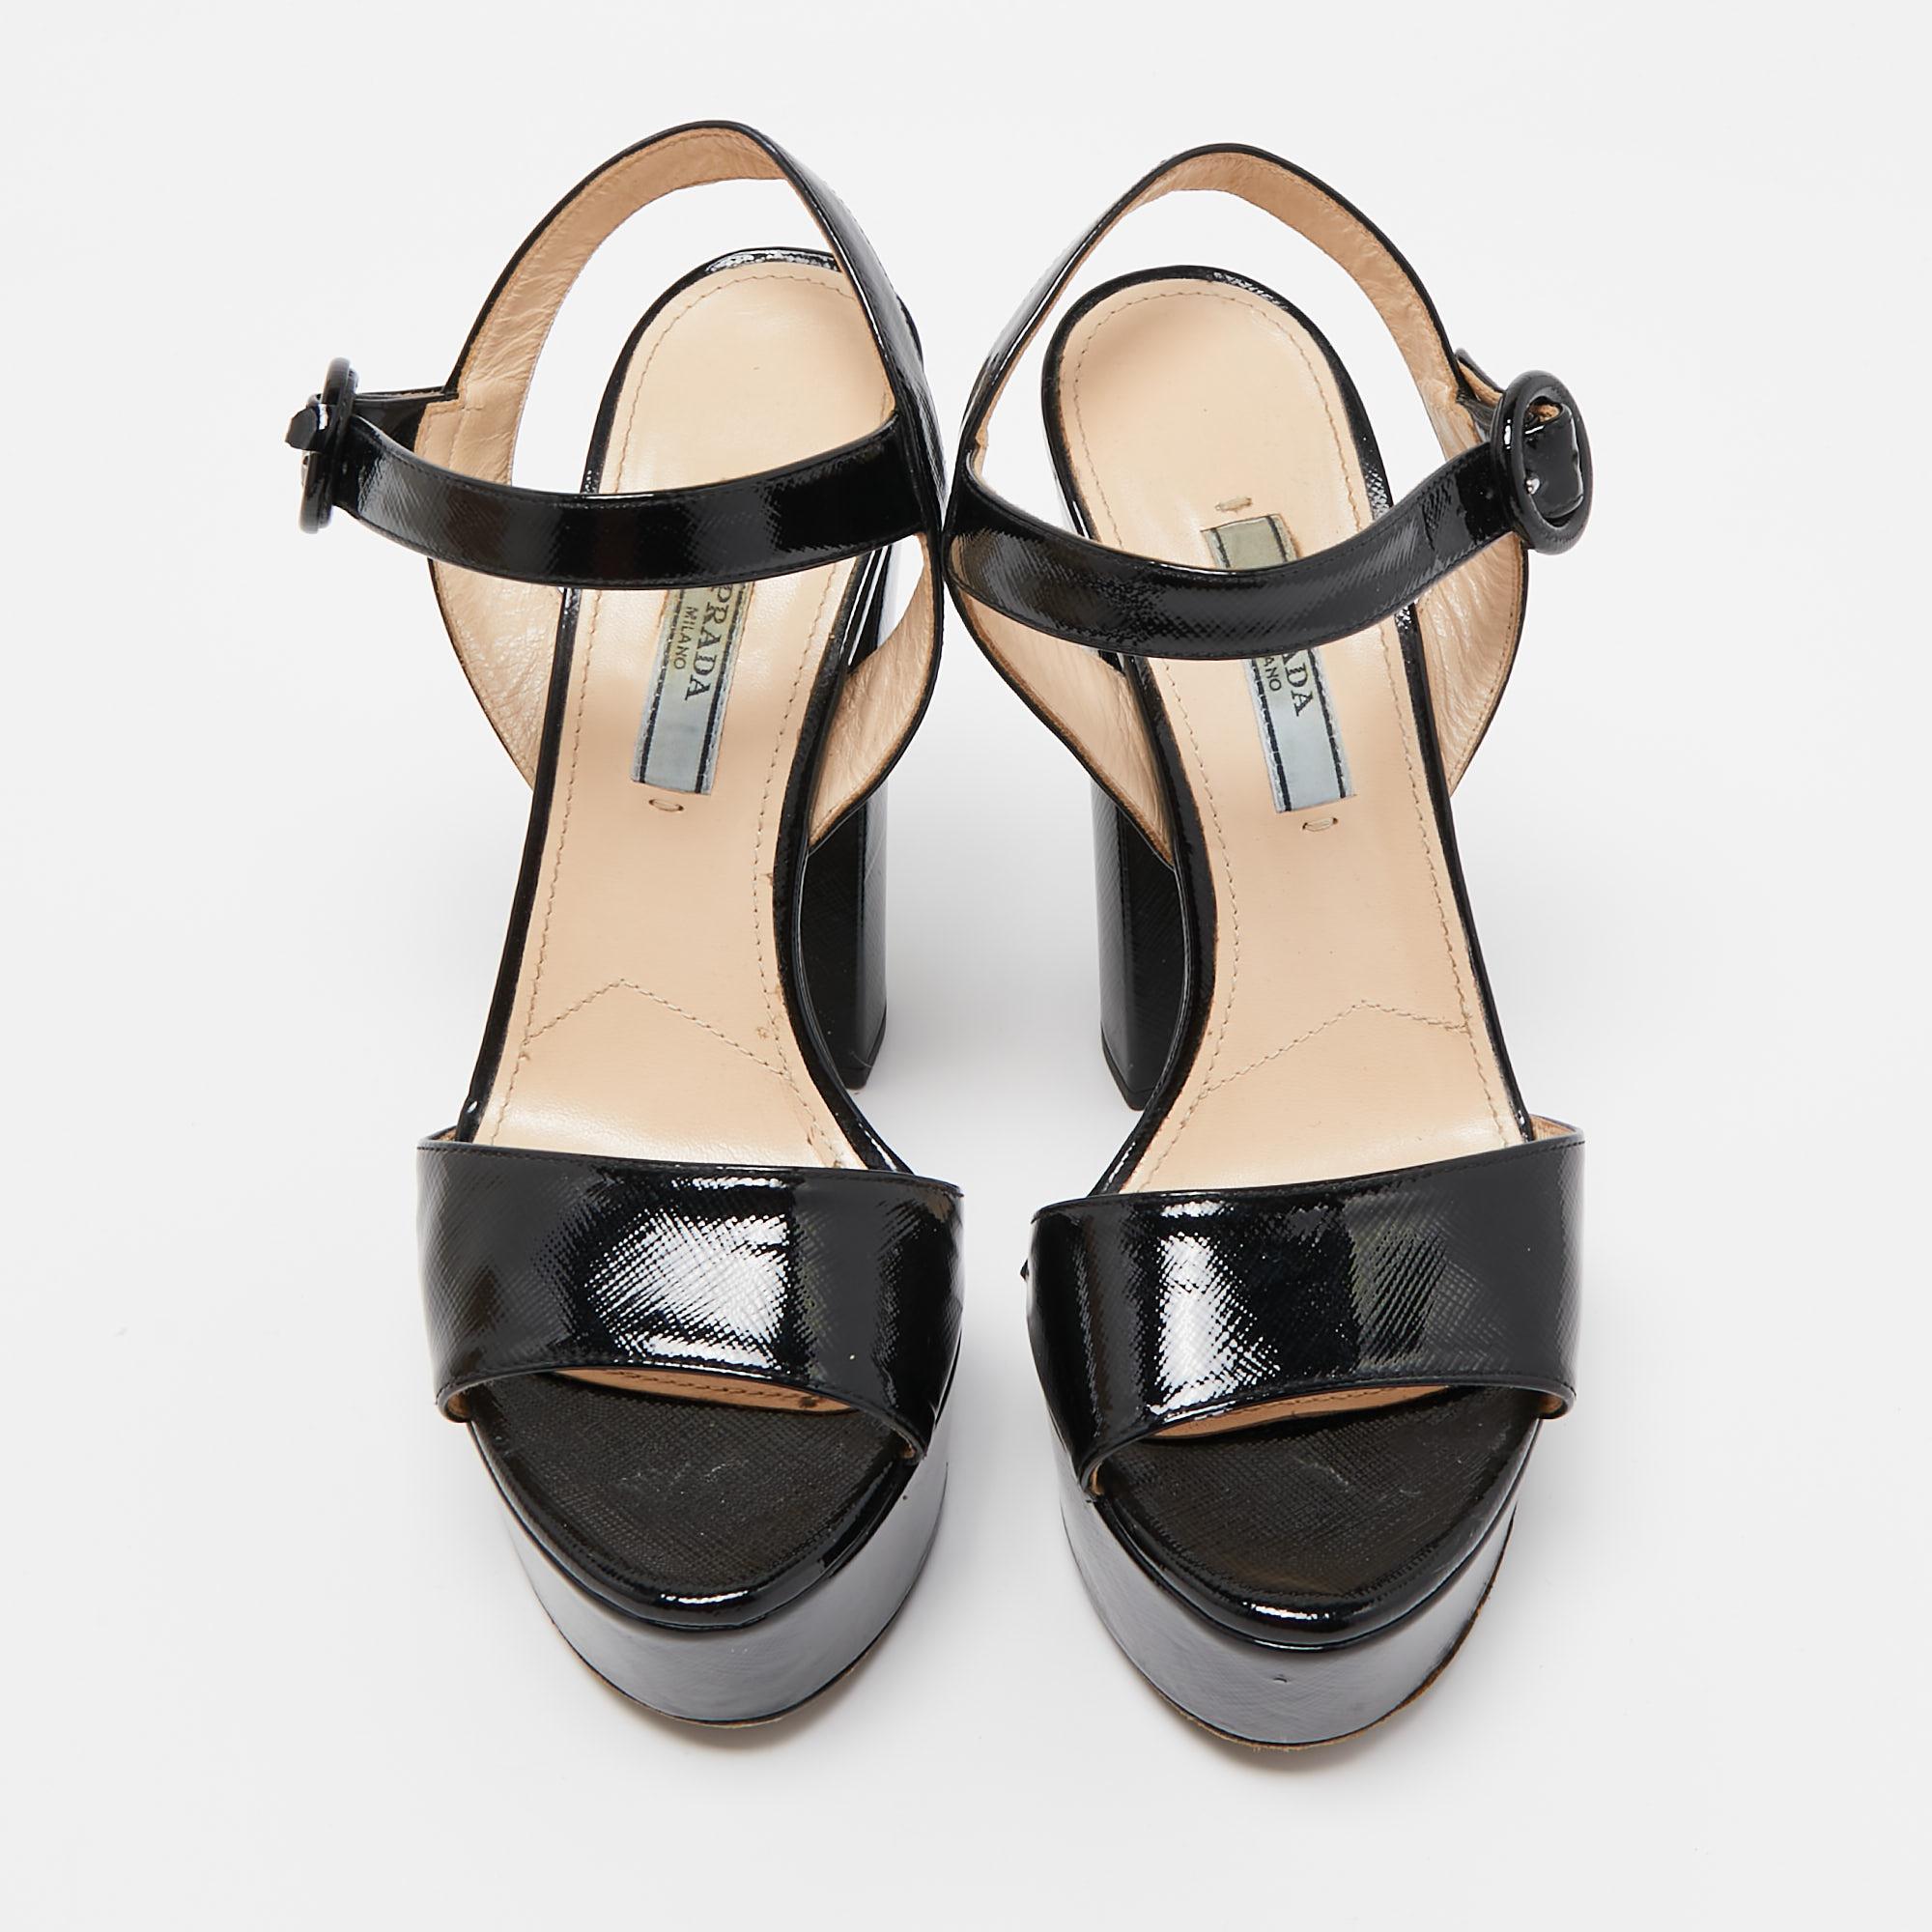 Make a statement with these Prada platform sandals for women. Impeccably crafted, these chic heels offer both fashion and comfort, elevating your look with each graceful step.

